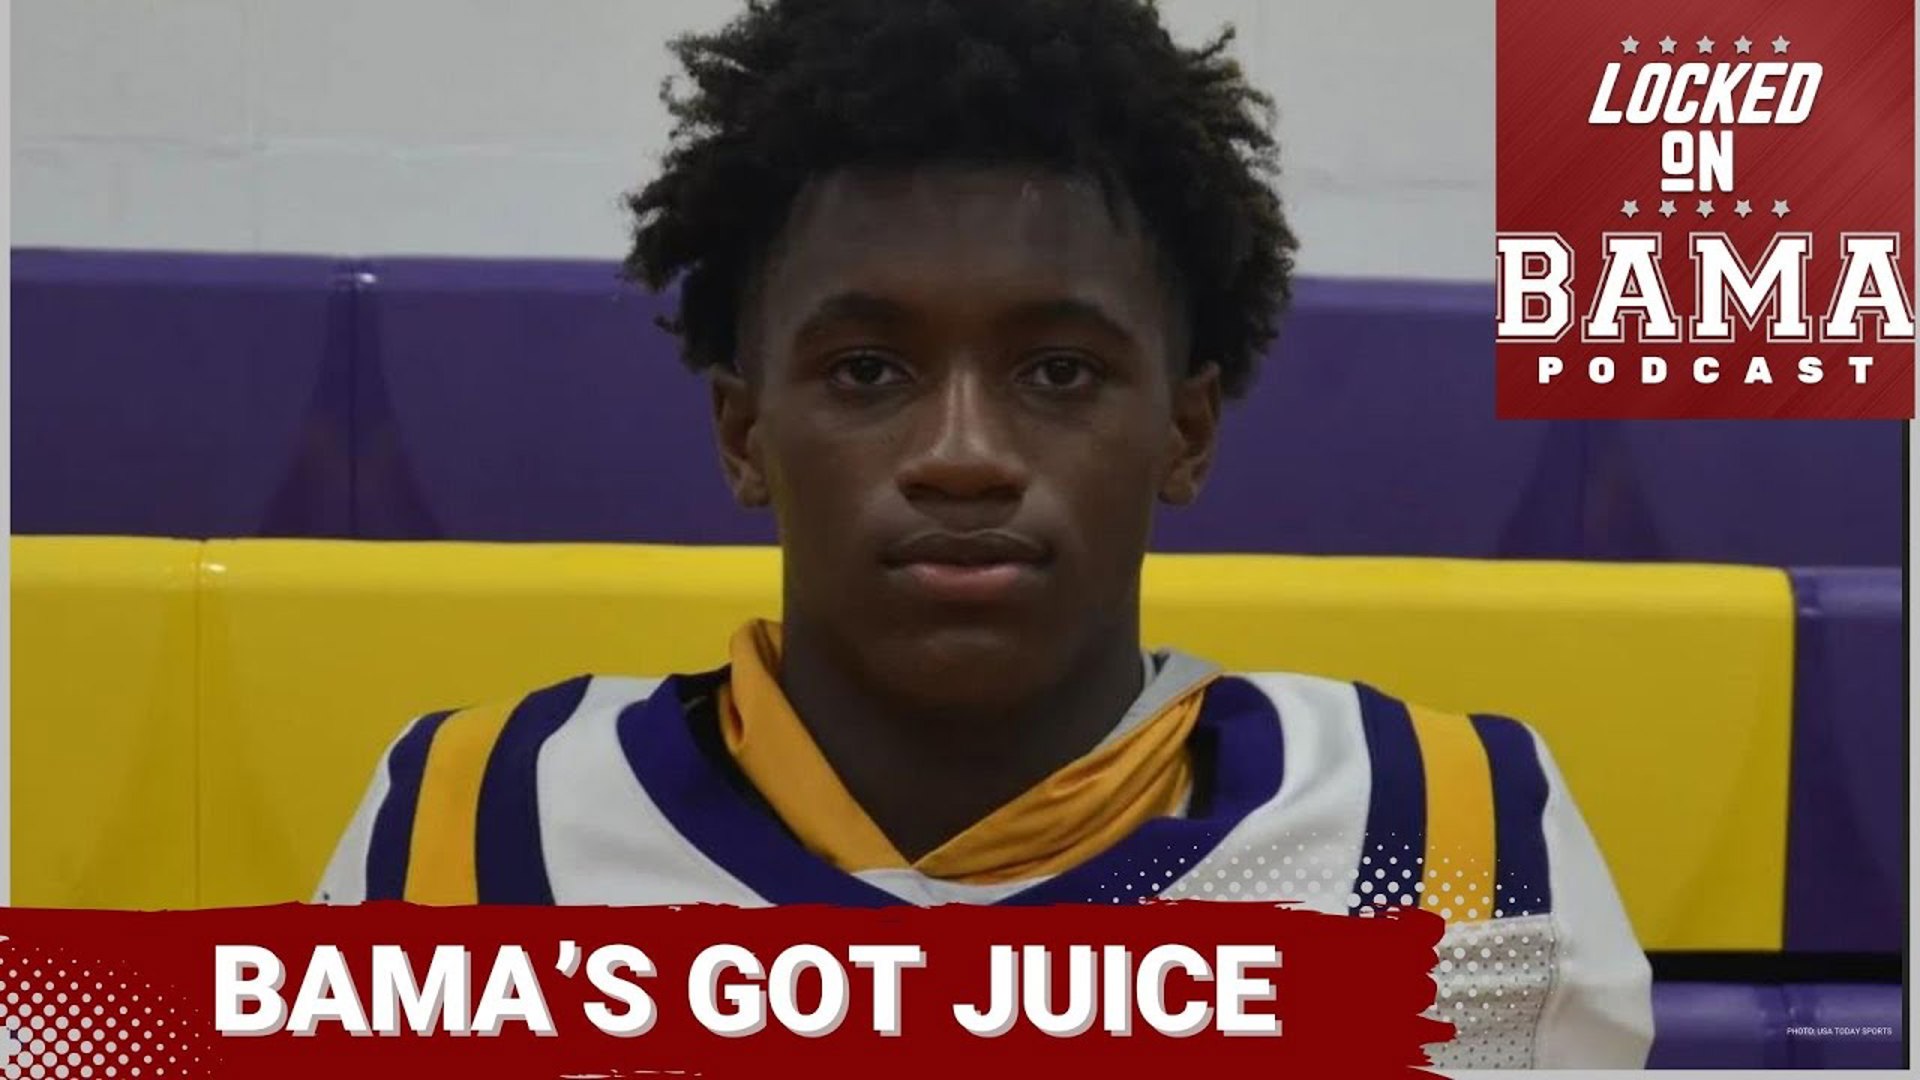 Alabama football gets a big commitment for the 2026 class and Jamarion juice Gordon. So who could be next for the Crimson Tide in any class?